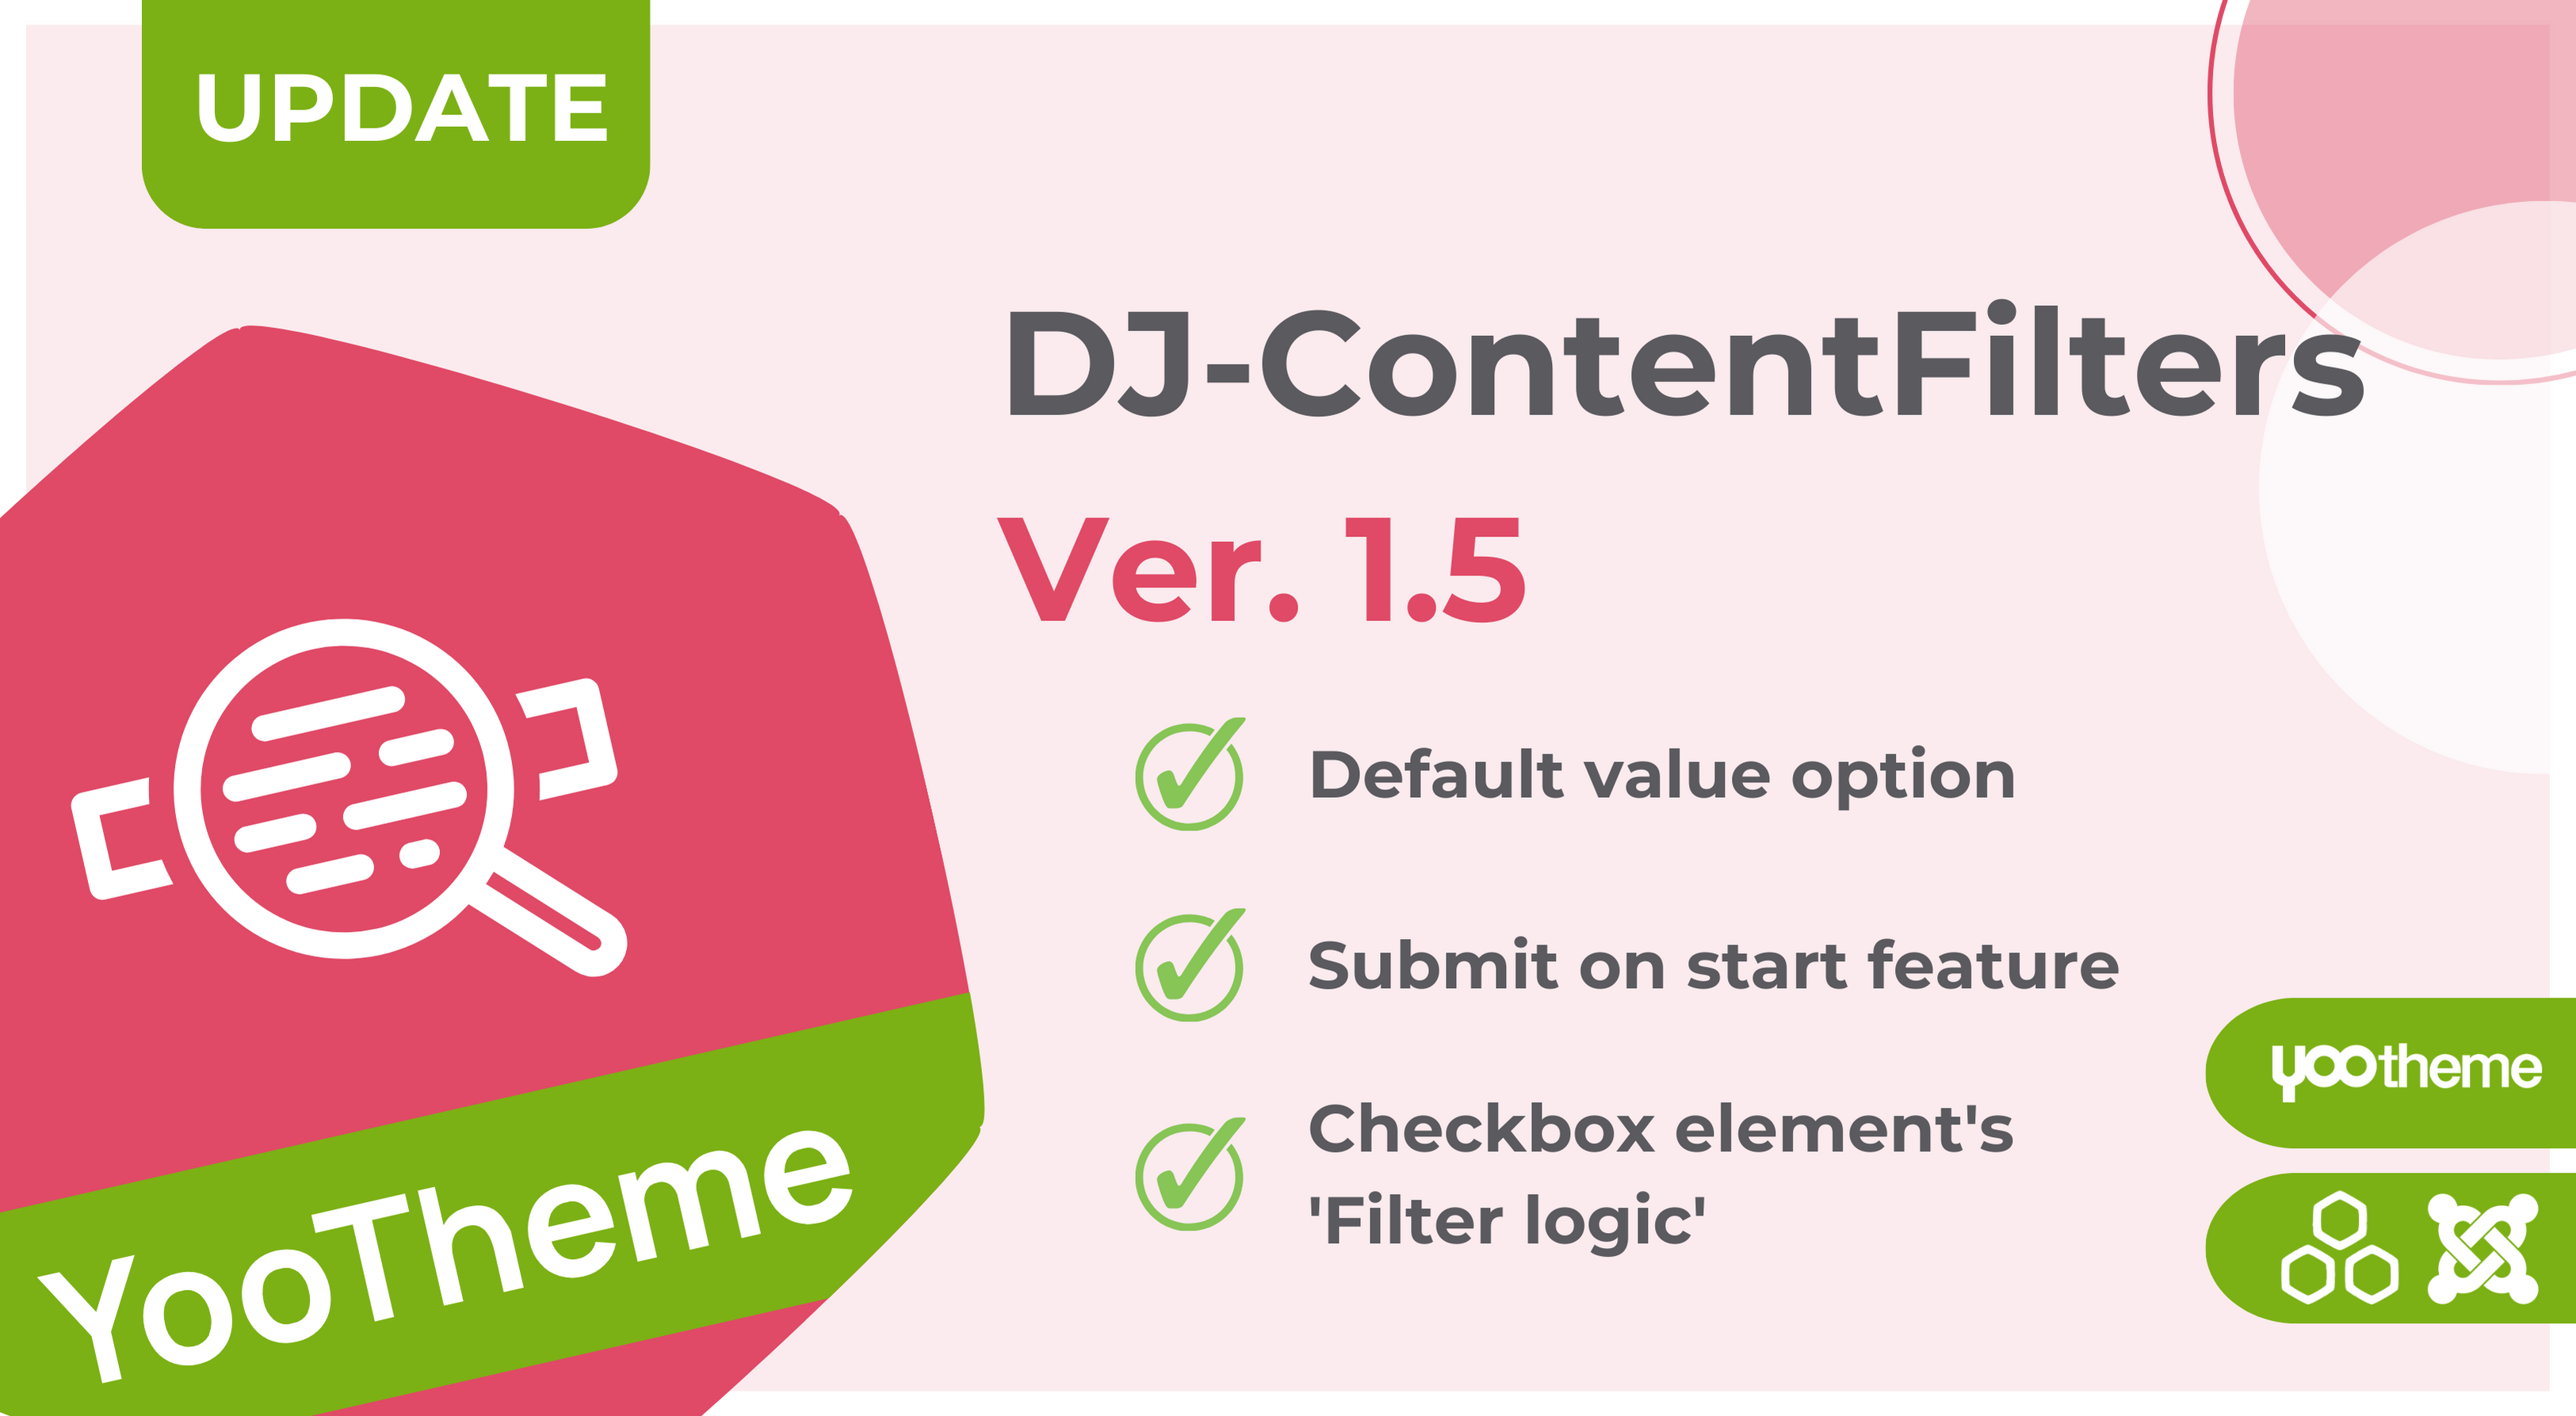 Introducing DJ-ContentFilters ver. 1.5 Stable: Explore Exciting New Features!